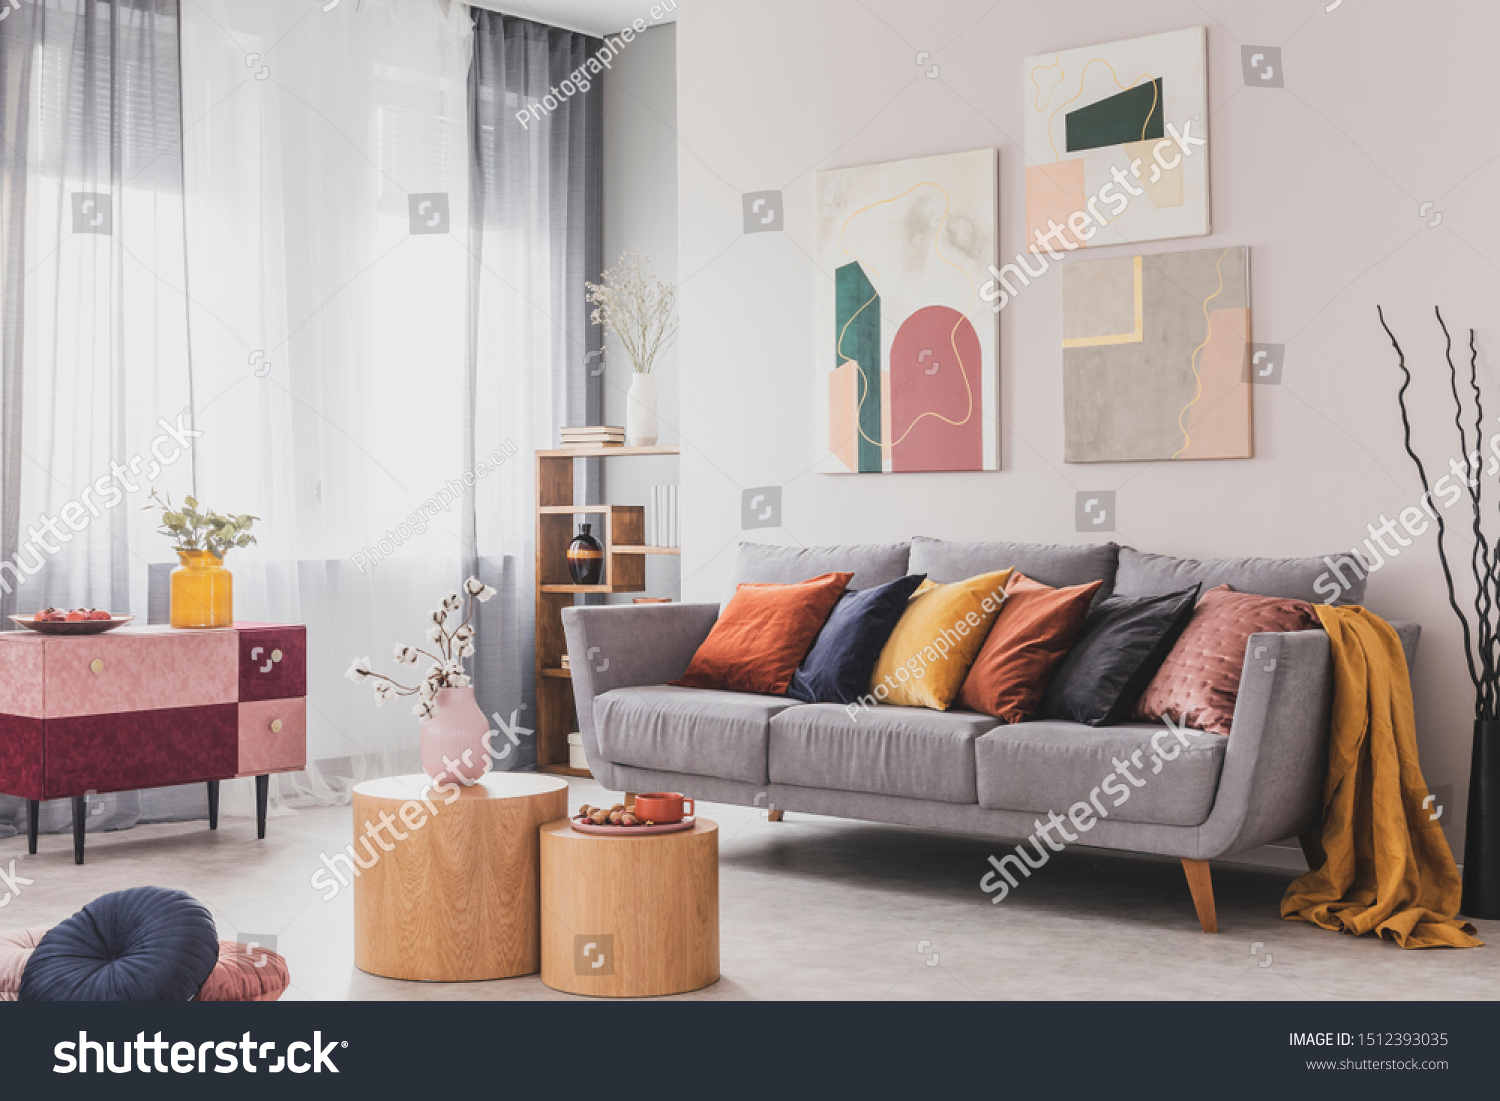 Coffee table in front of grey couch in scandinavian living room #1512393035